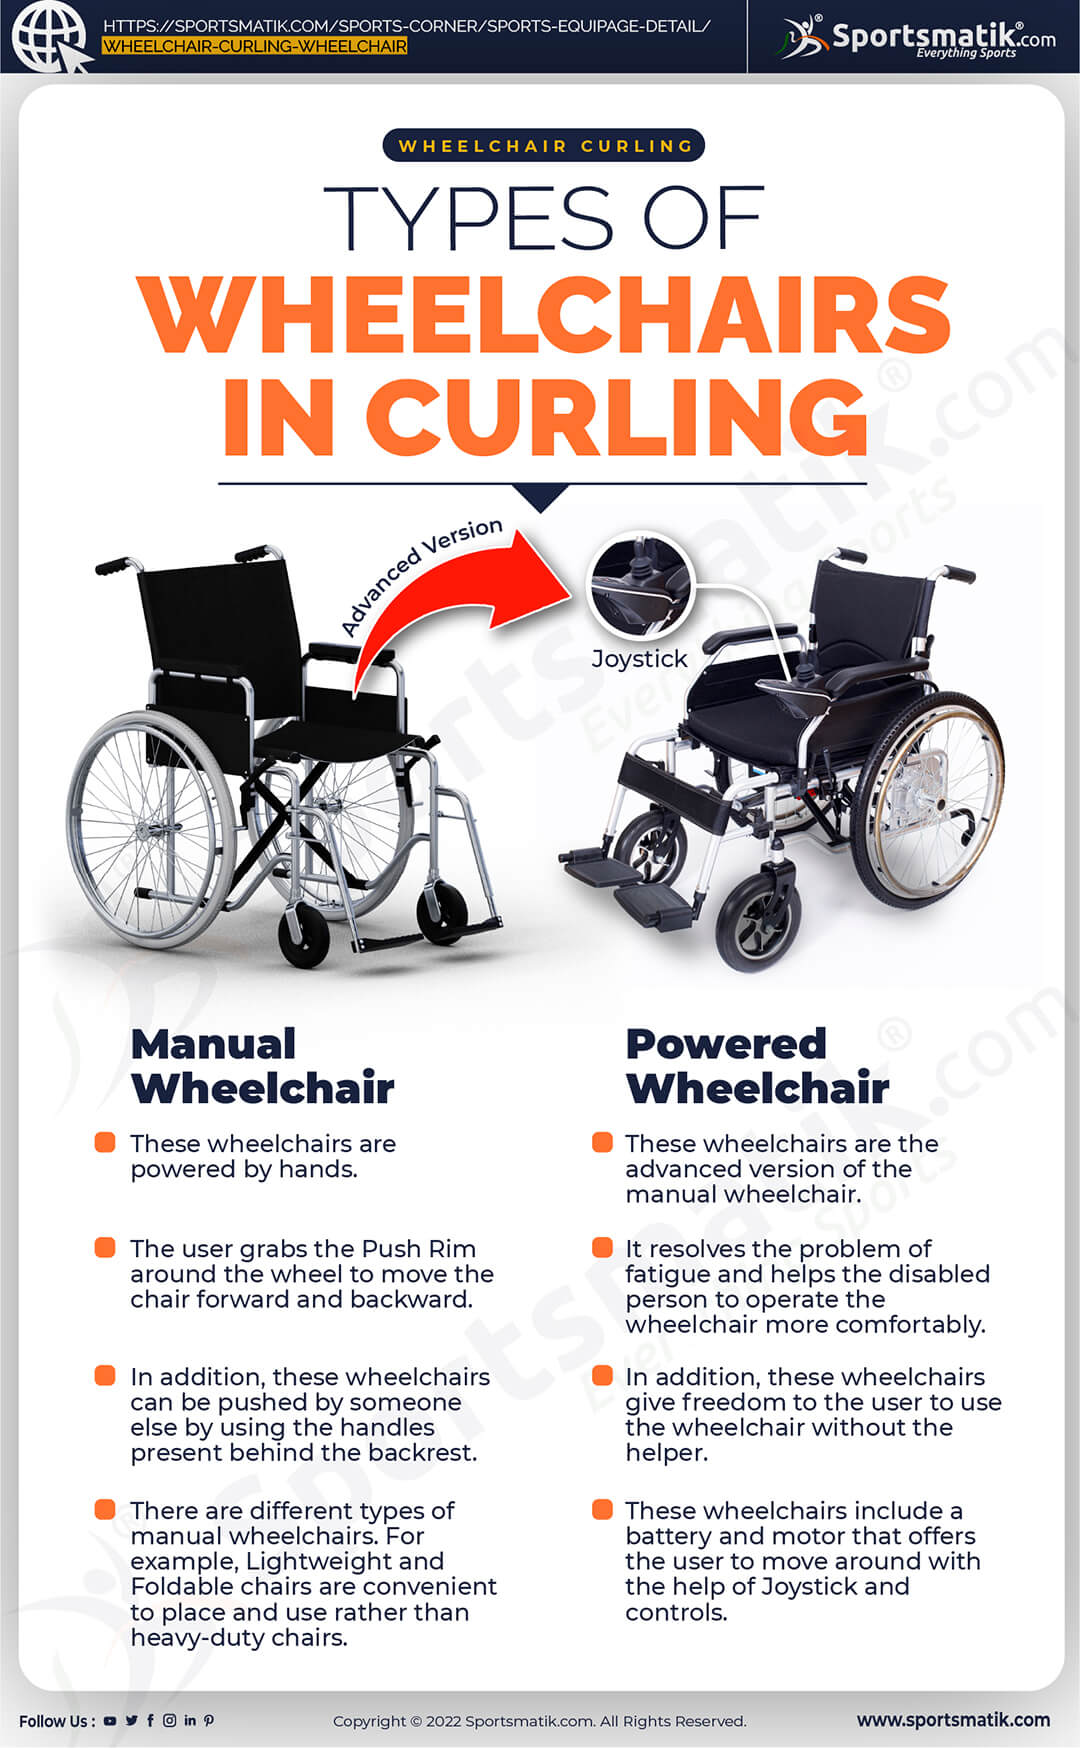 Types of Wheelchairs used in Curling